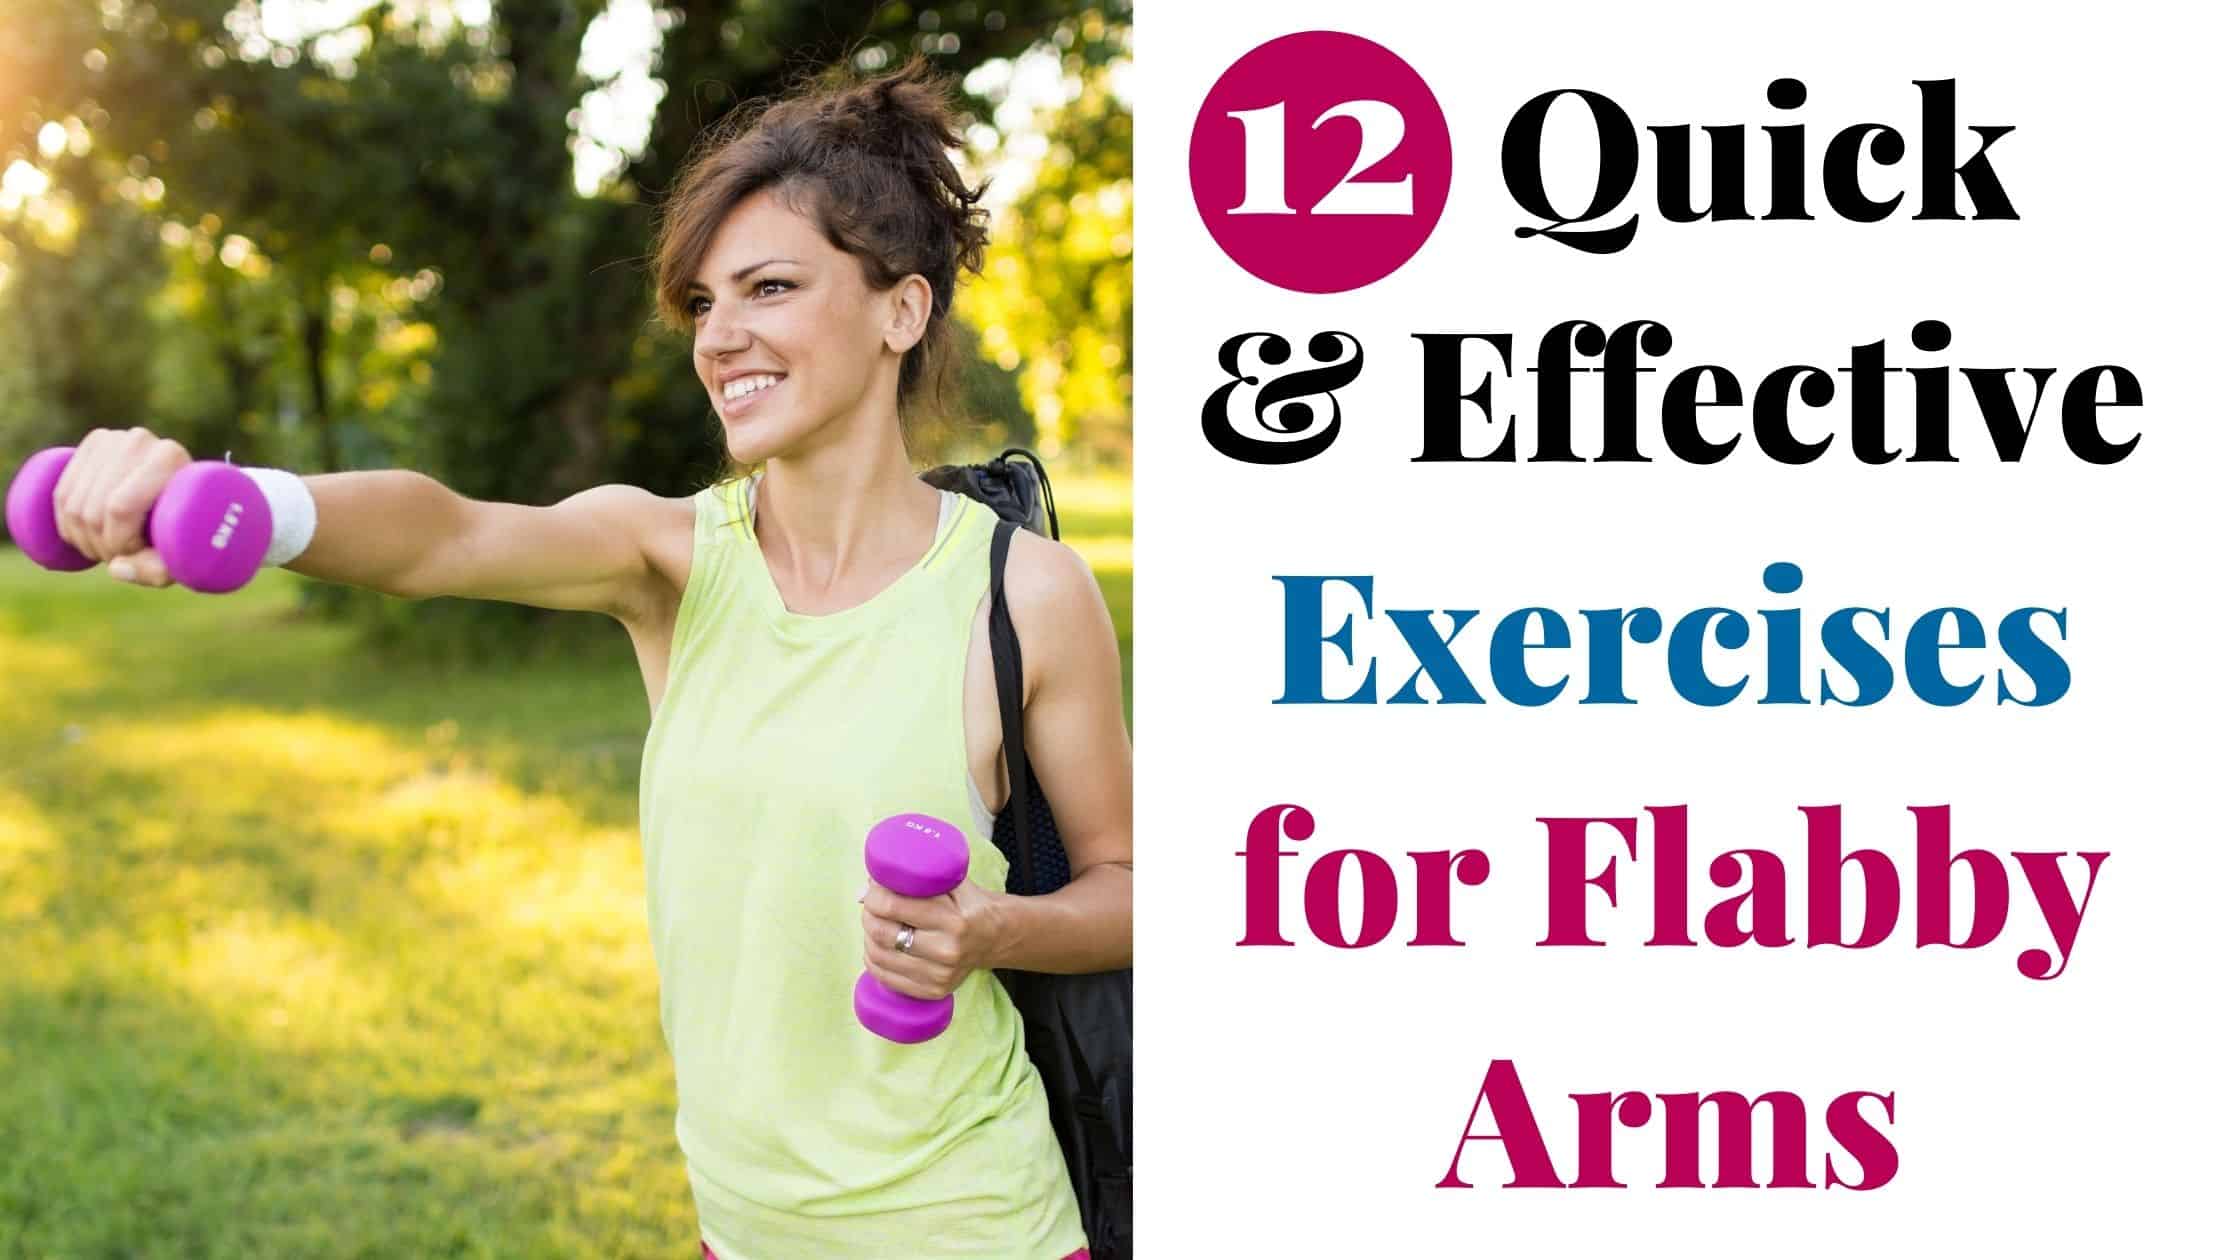 12 Quick & Effective Exercises for Flabby Arms